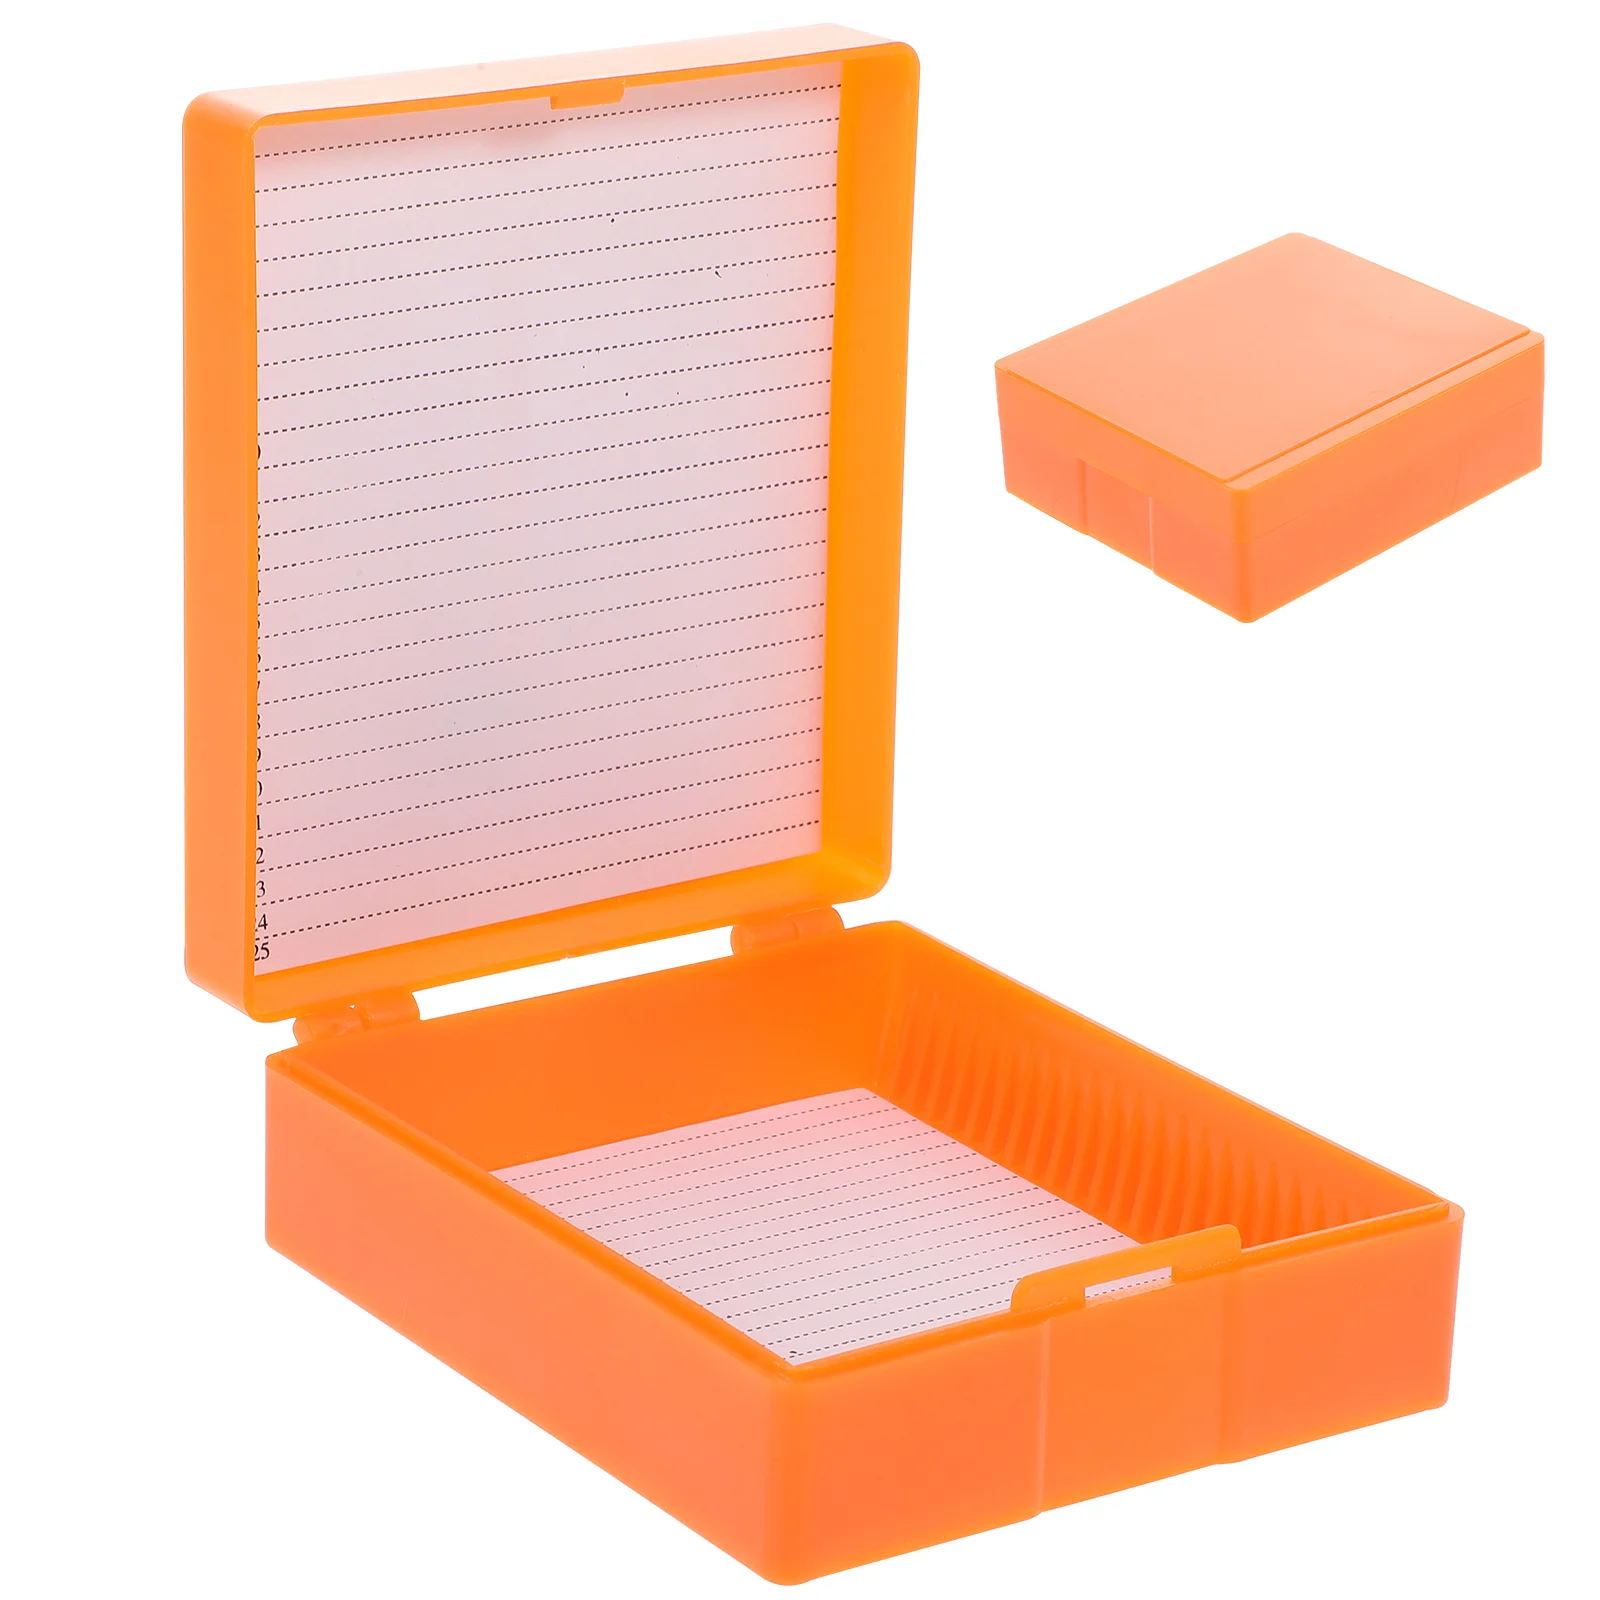 

Slide Box Glass Containers Microscope Accessories Tool Holder Plates Abs Storing Laboratory Supply Tray Storage